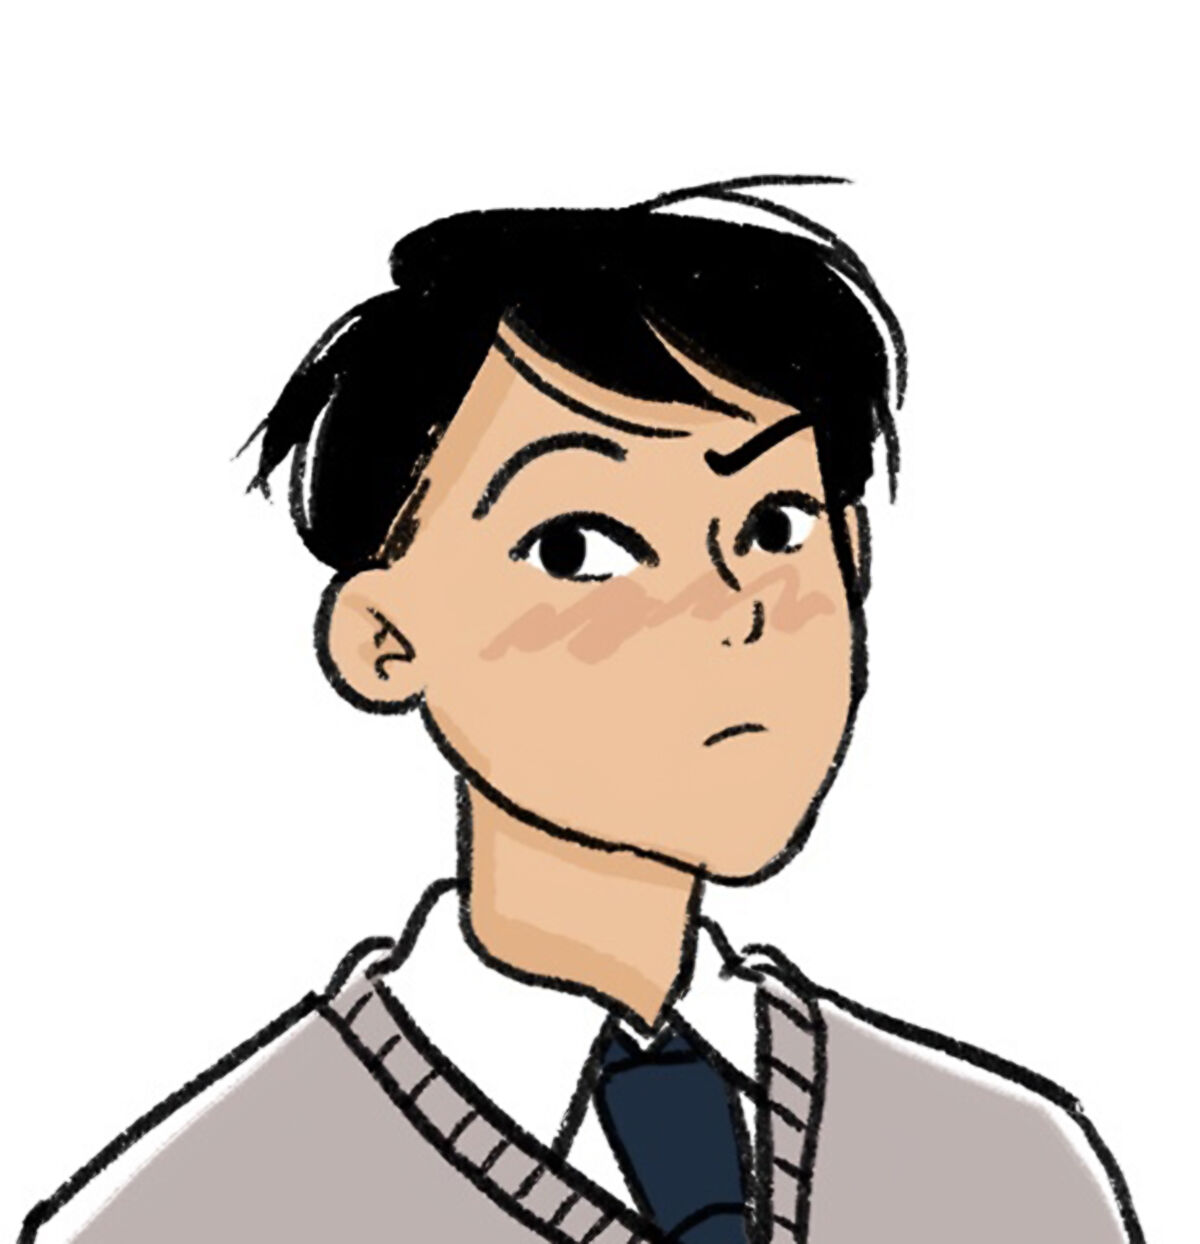 Heartstopper leaves out a crucial fact about Tao